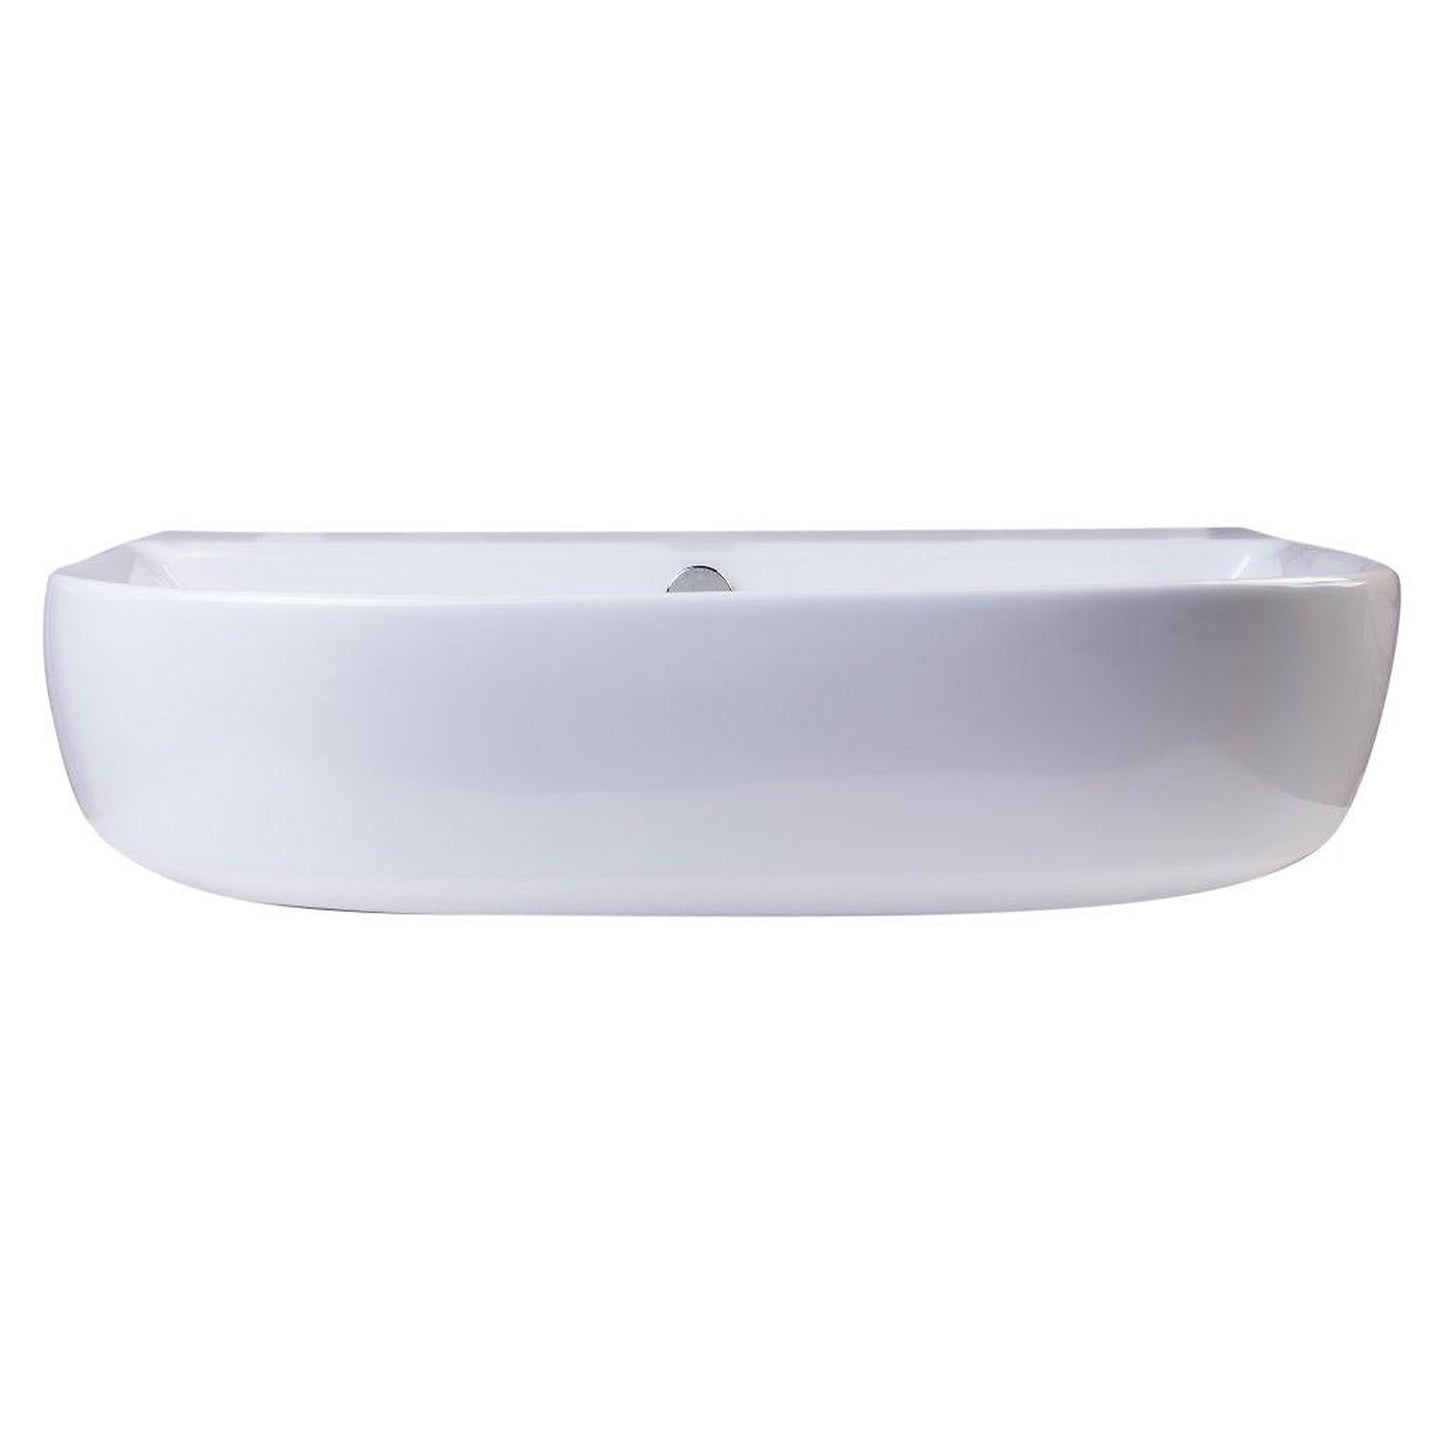 ALFI Brand AB111 24" White Wall-Mounted D-Shaped Bathroom Sink With Single Faucet Hole and Overflow